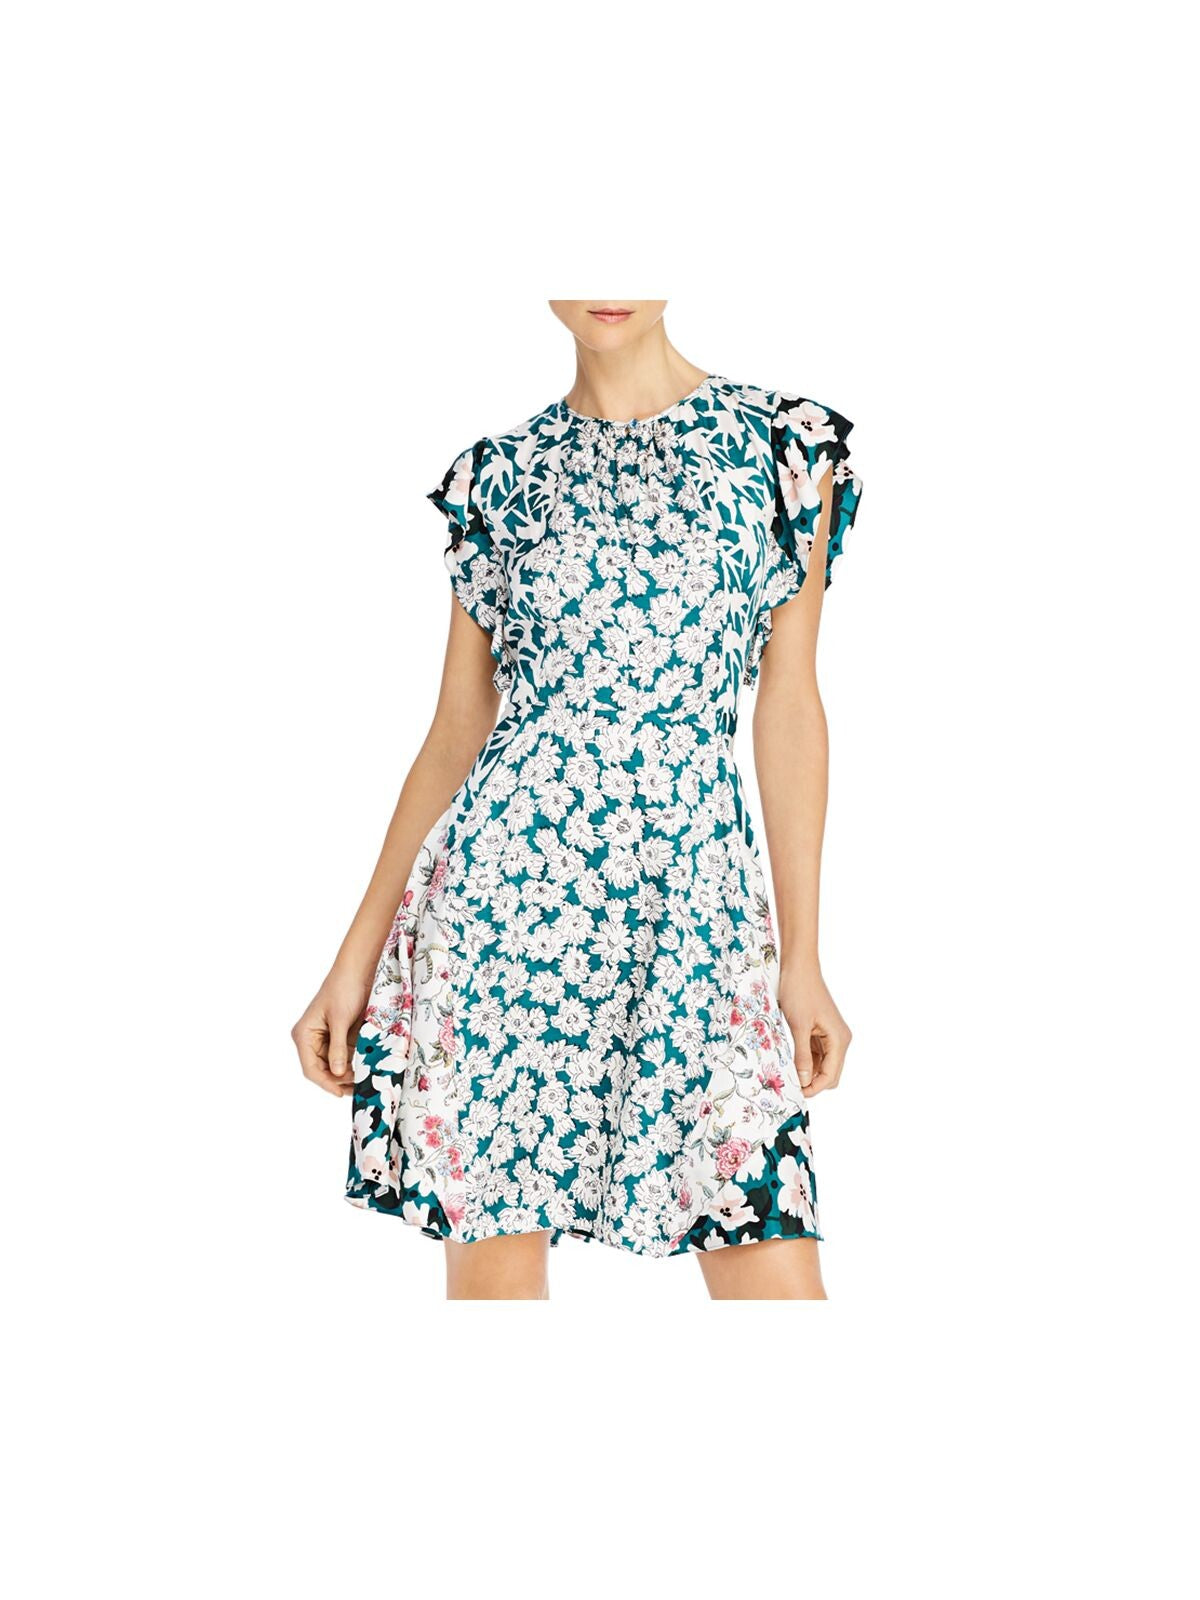 REBECCA TAYLOR Womens Green Zippered Gathered Lined Skirt Keyhole Front Floral Flutter Sleeve Round Neck Above The Knee Fit + Flare Dress 0